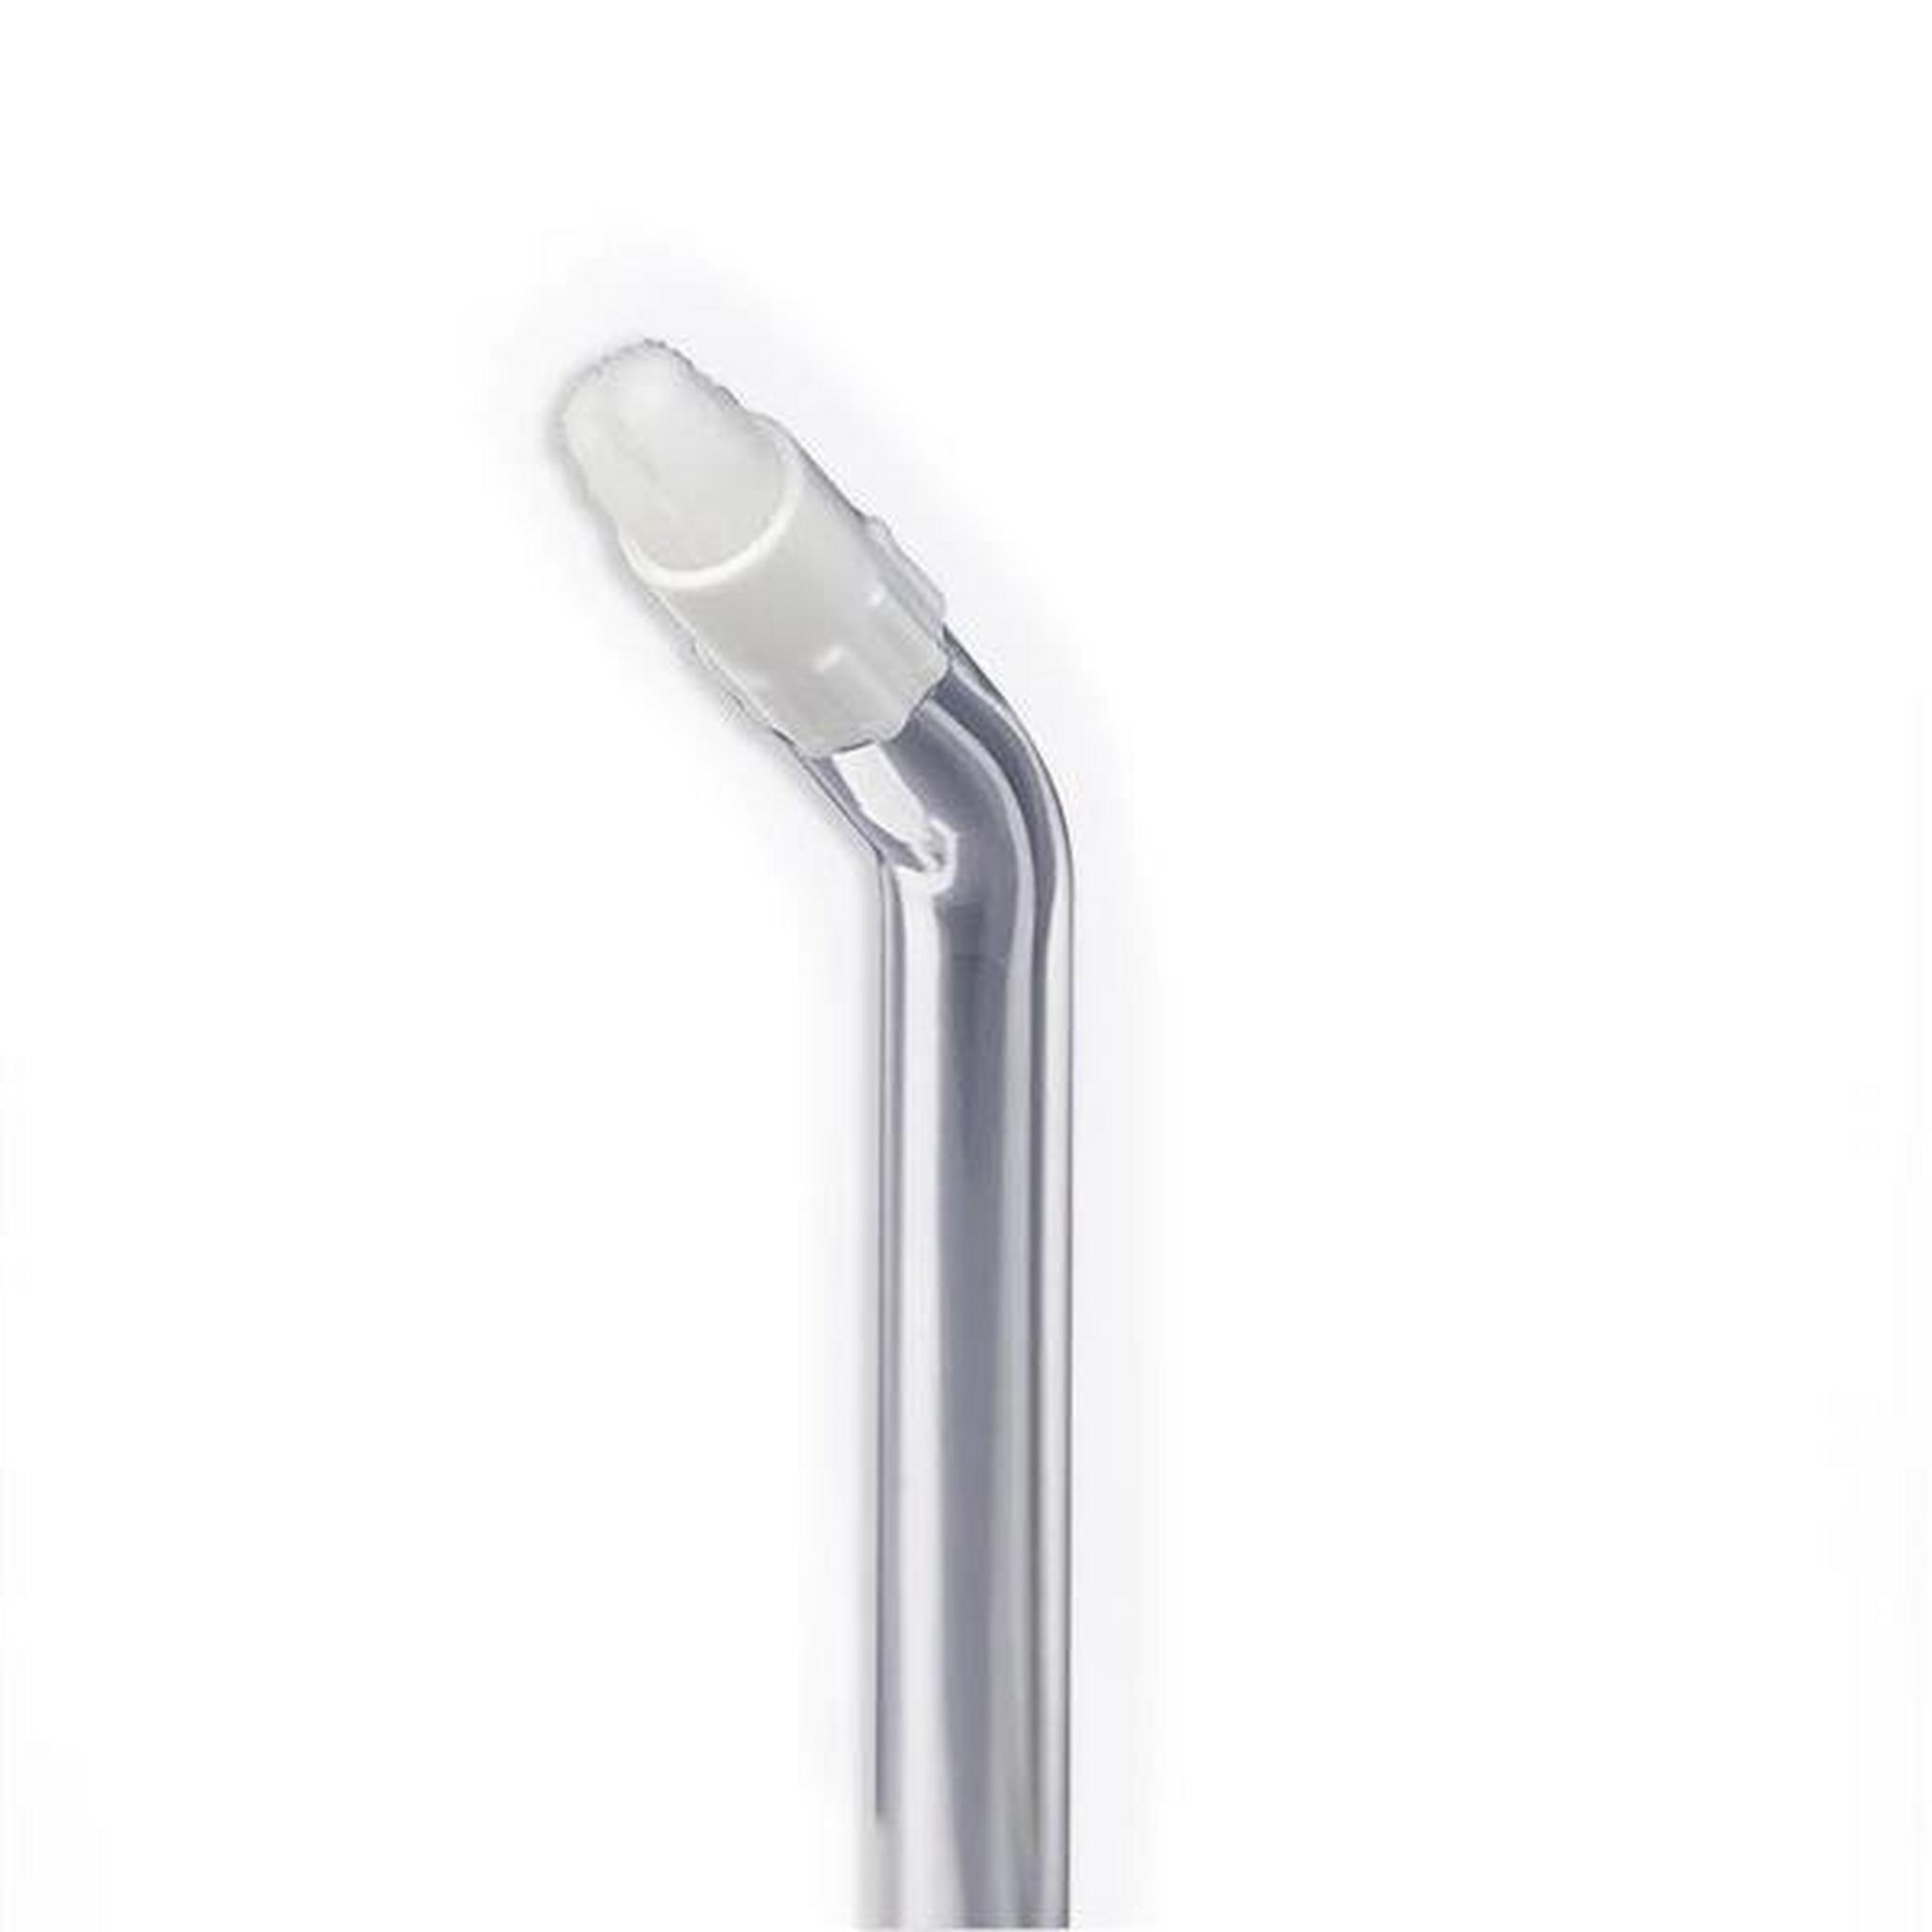 Waterpik Orthodontic Replacement Tip (OD-100E) - Silver